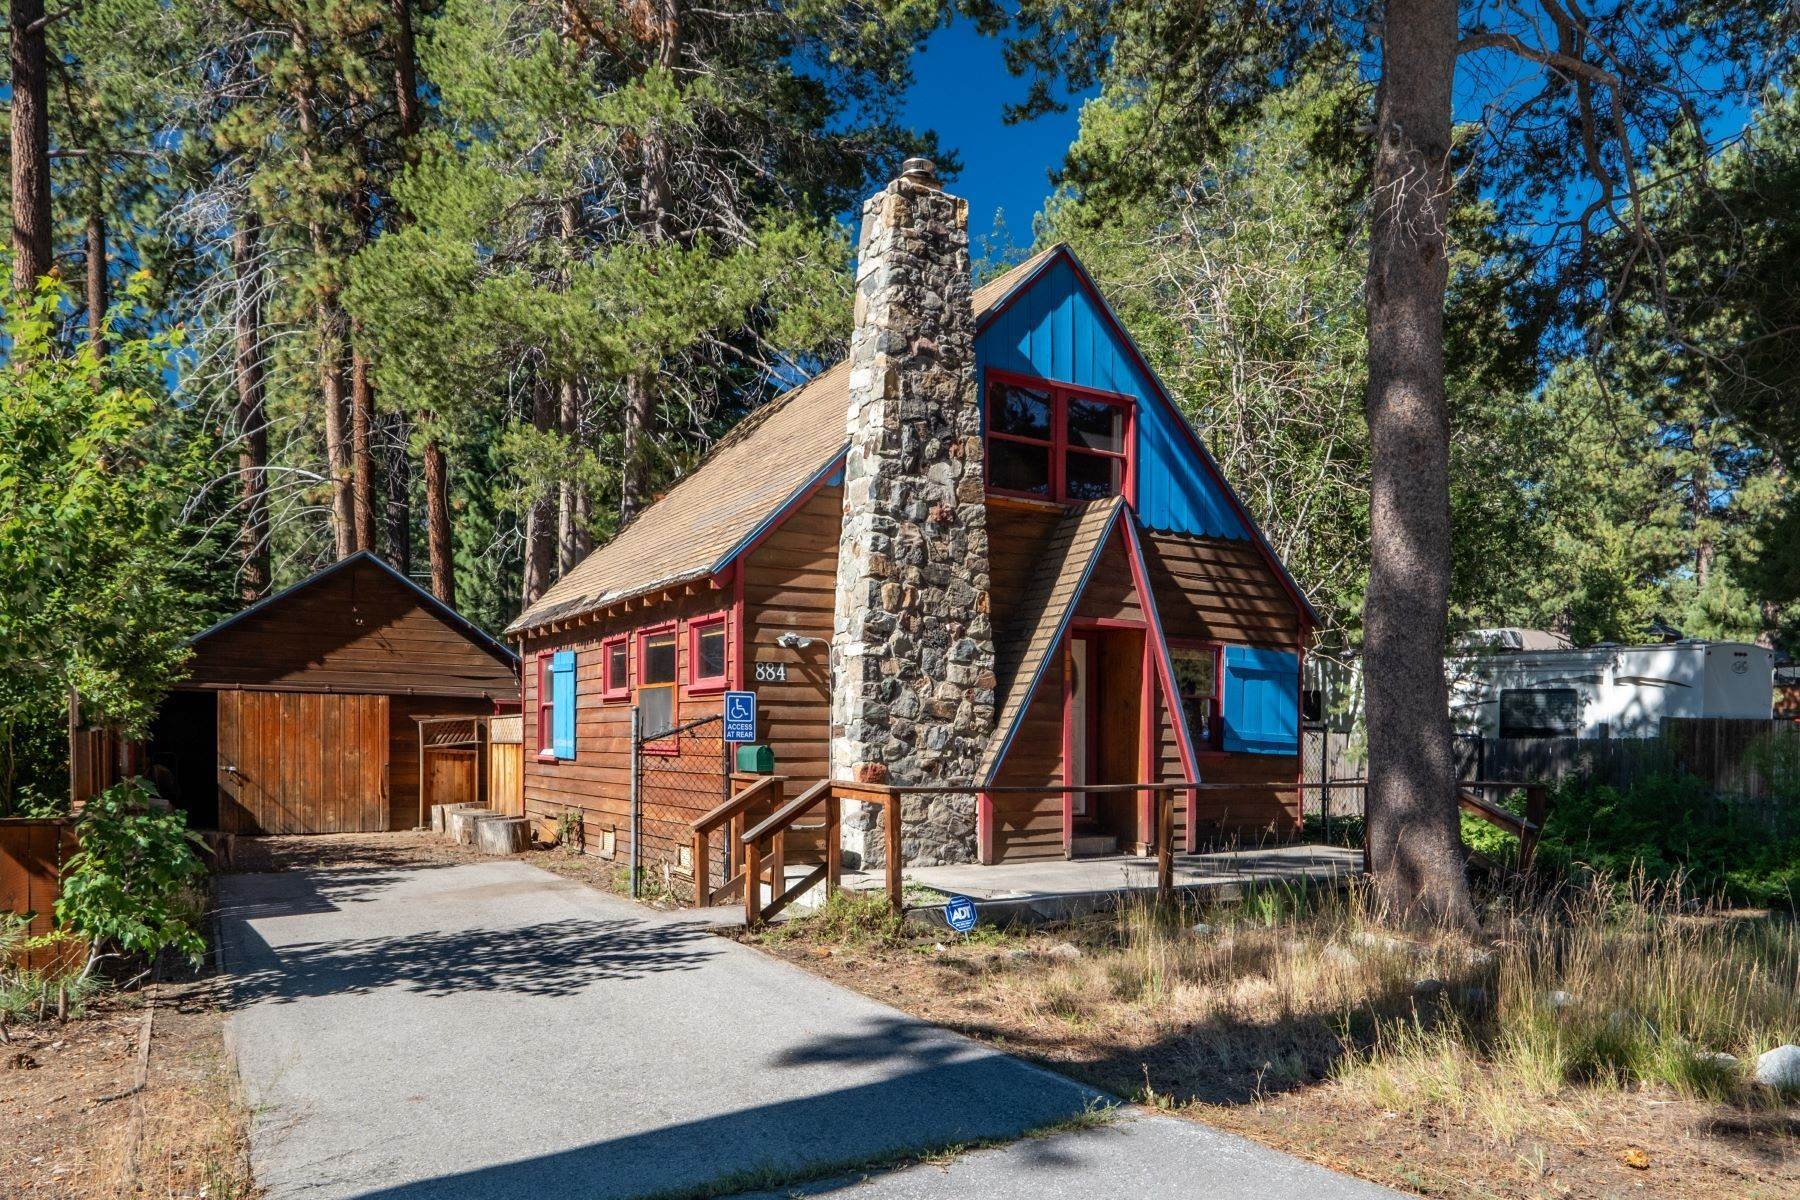 Single Family Homes for Active at Rare in-town VHR development potential on 1/4 acre 884 Emerald Bay Rd South Lake Tahoe, California 96150 United States